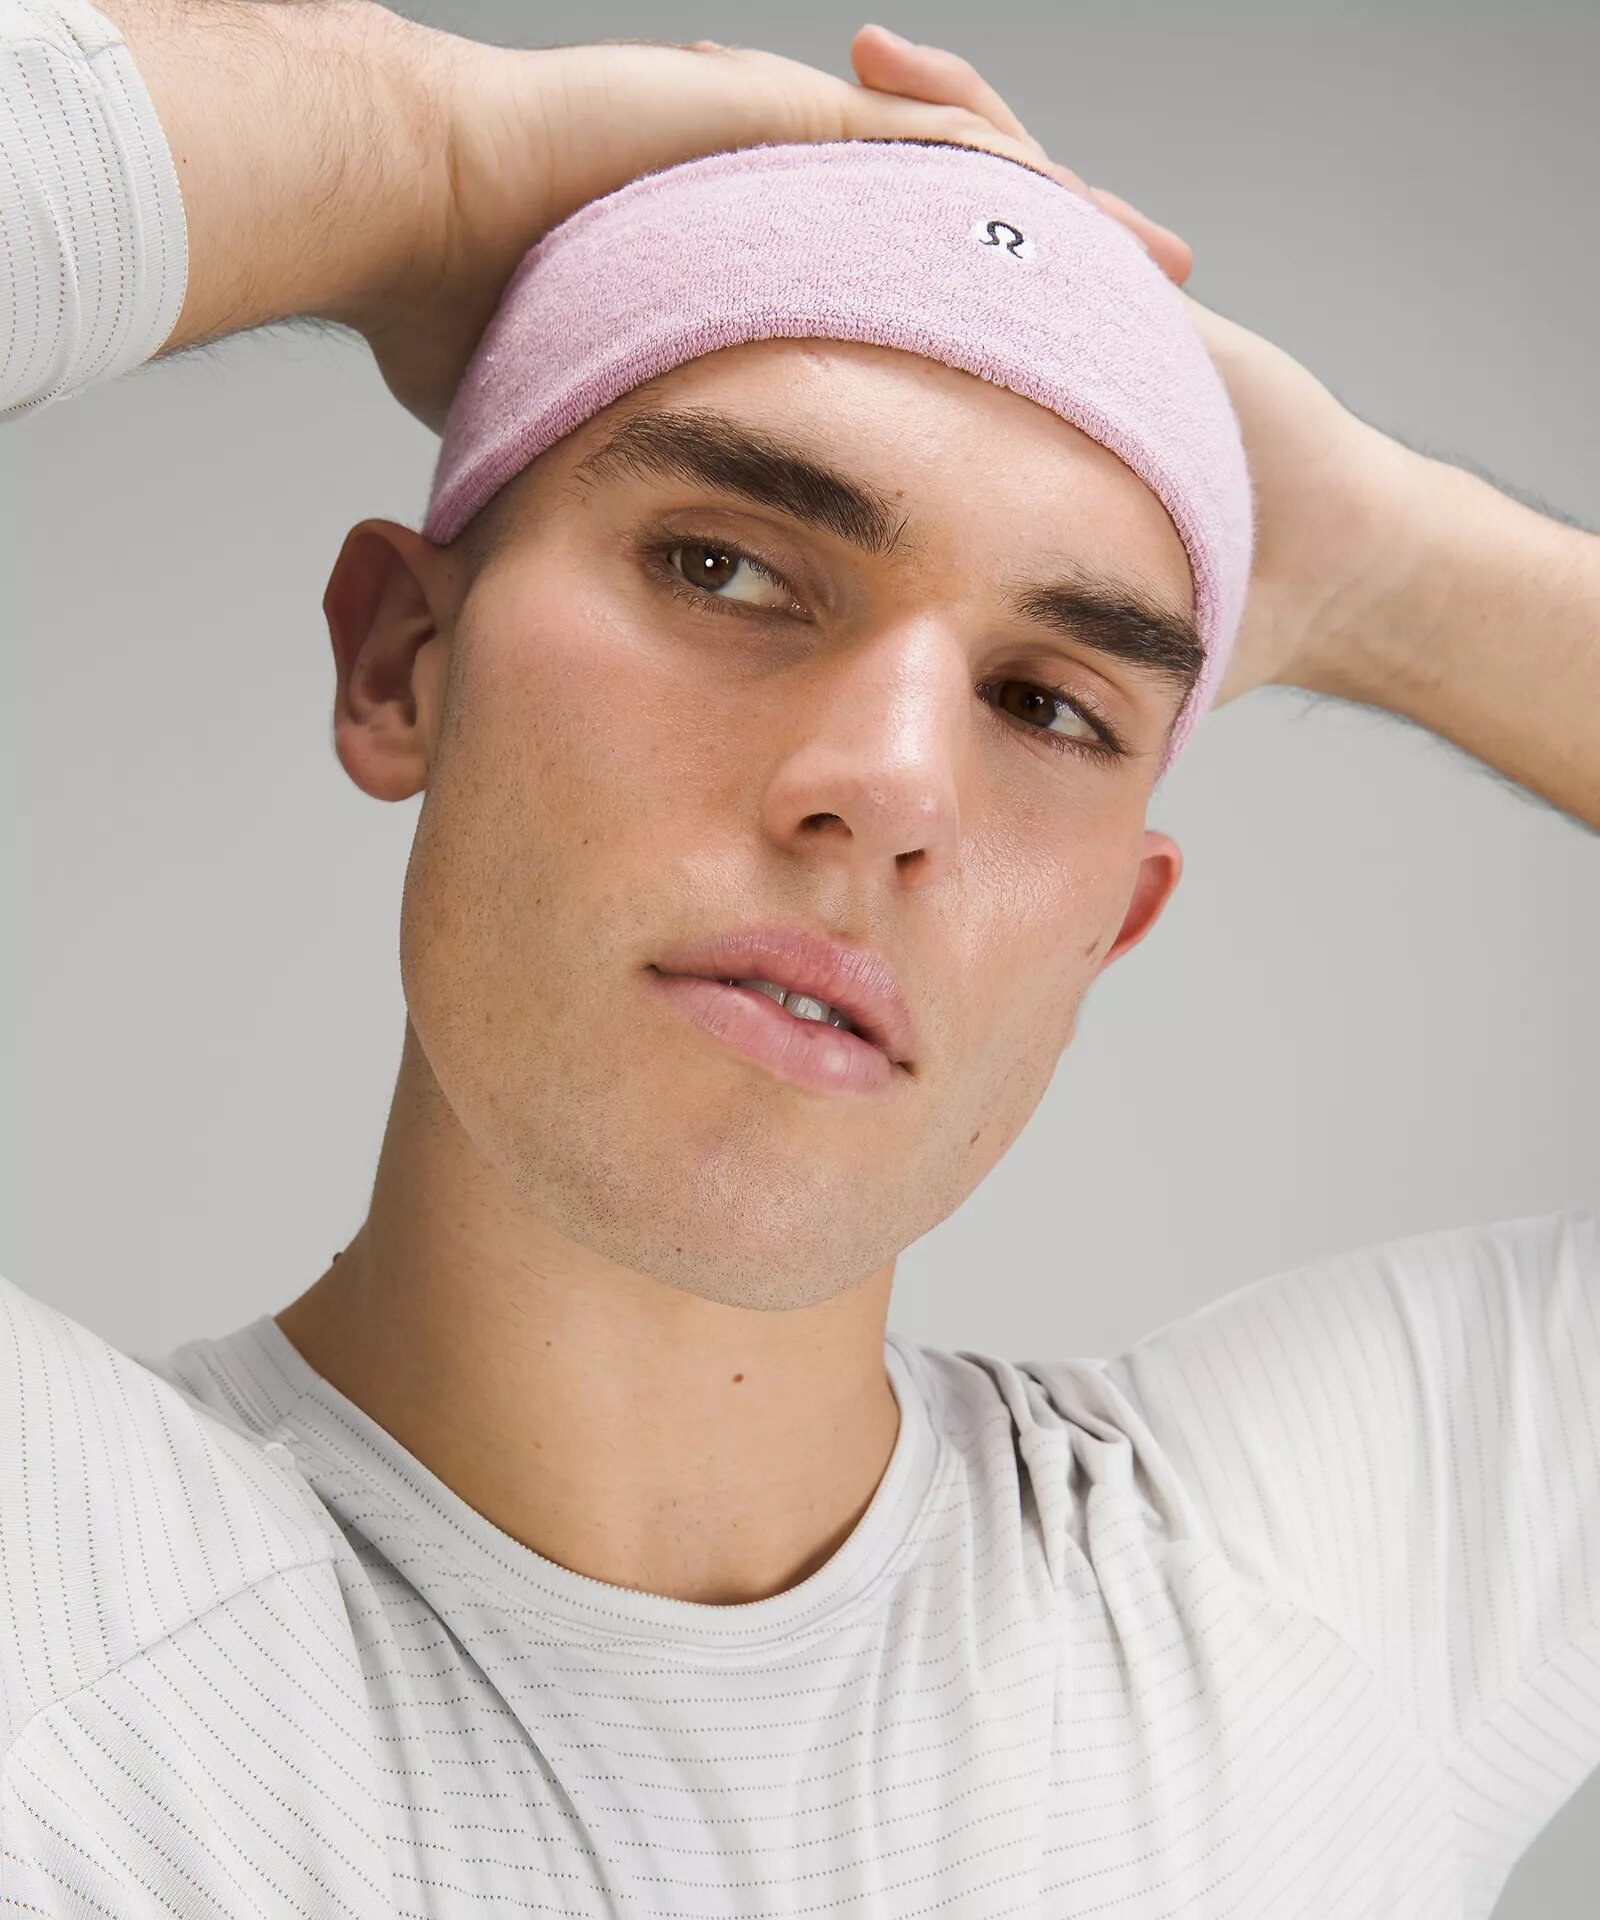 a person wearing the headband on their head